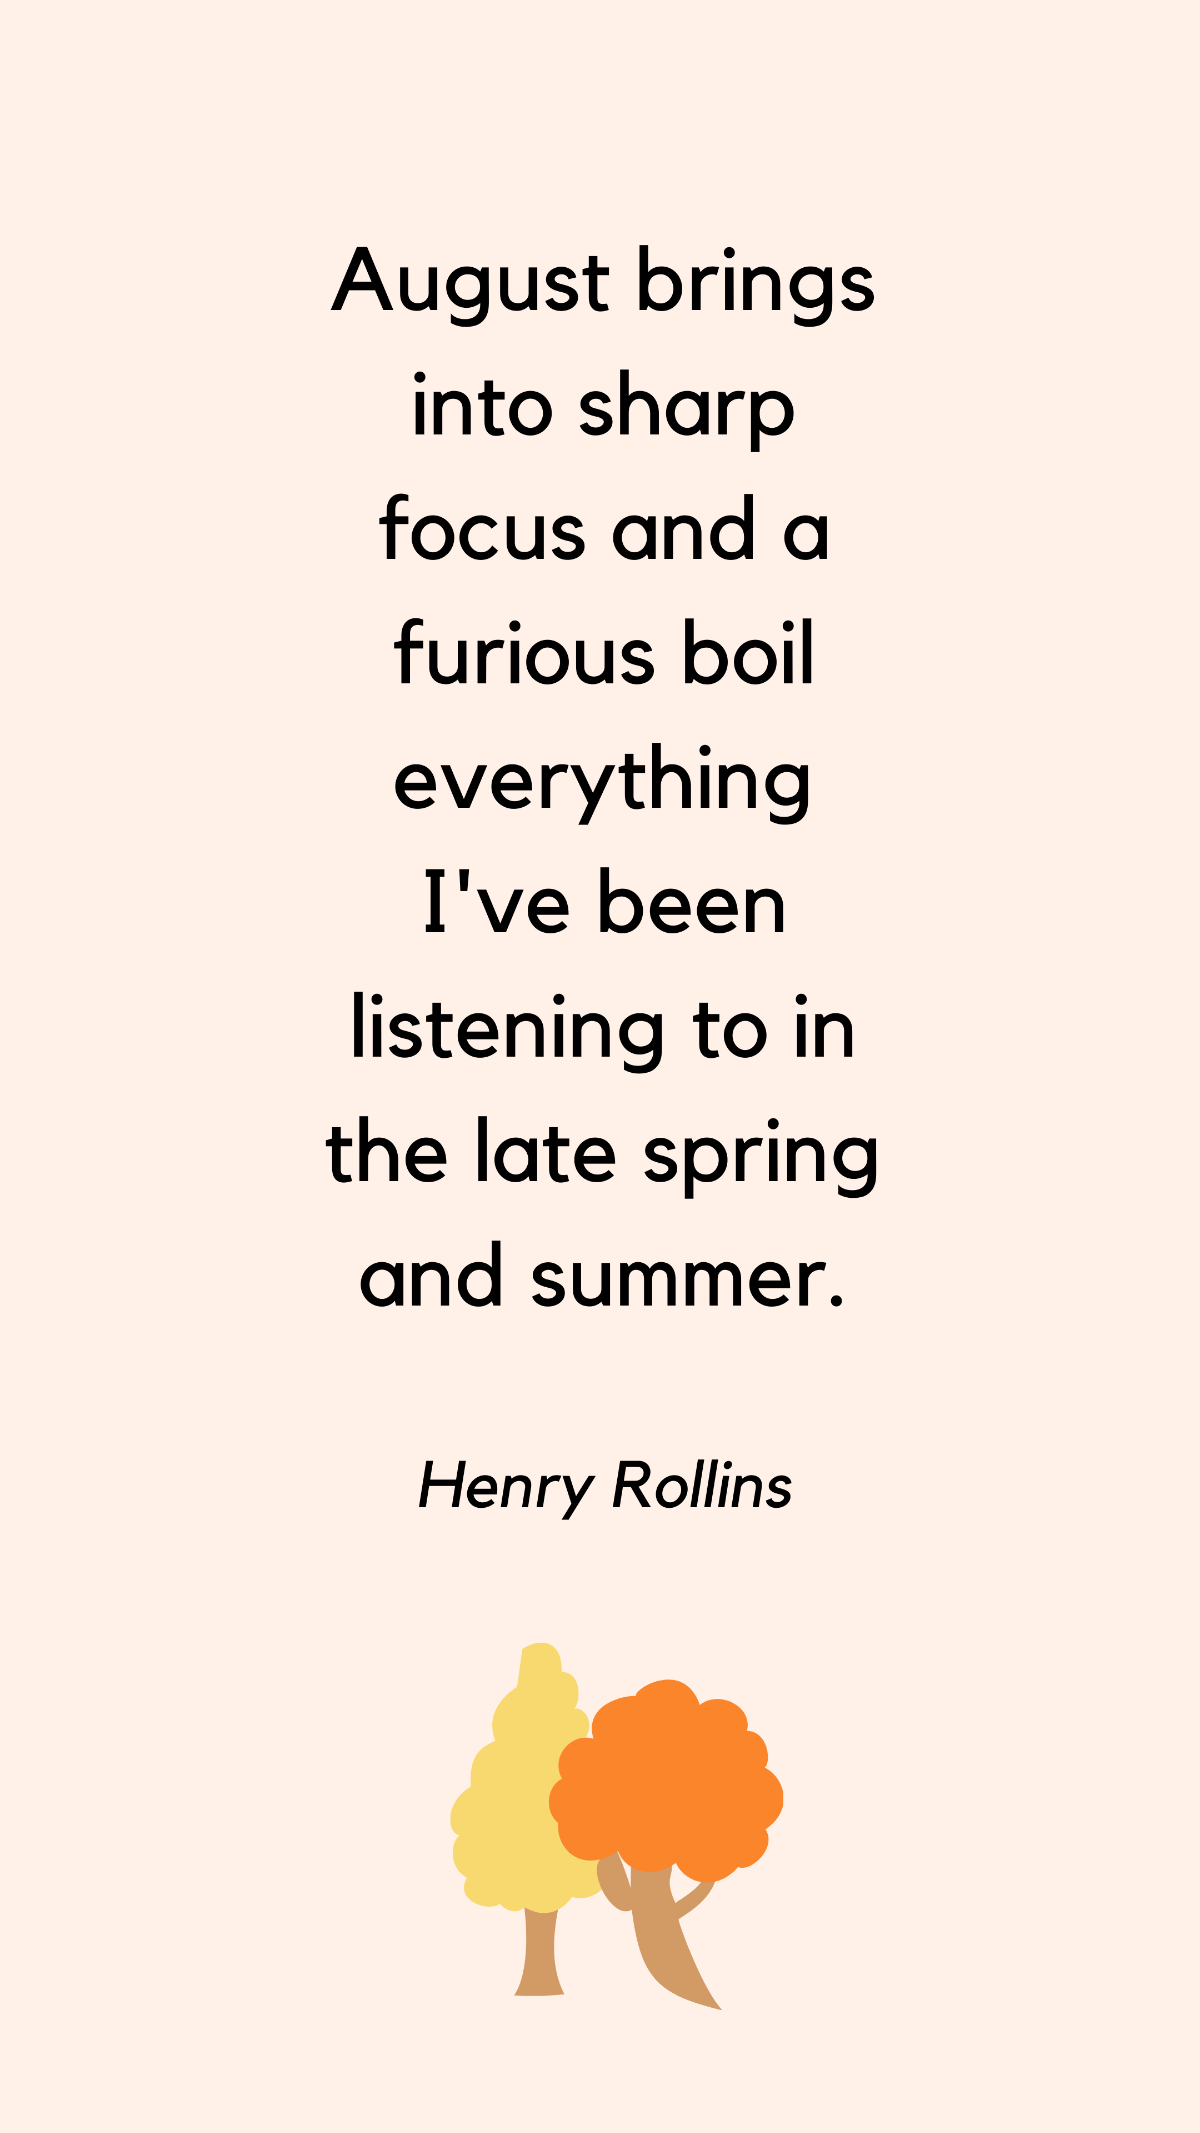 Henry Rollins - August brings into sharp focus and a furious boil everything I've been listening to in the late spring and summer.